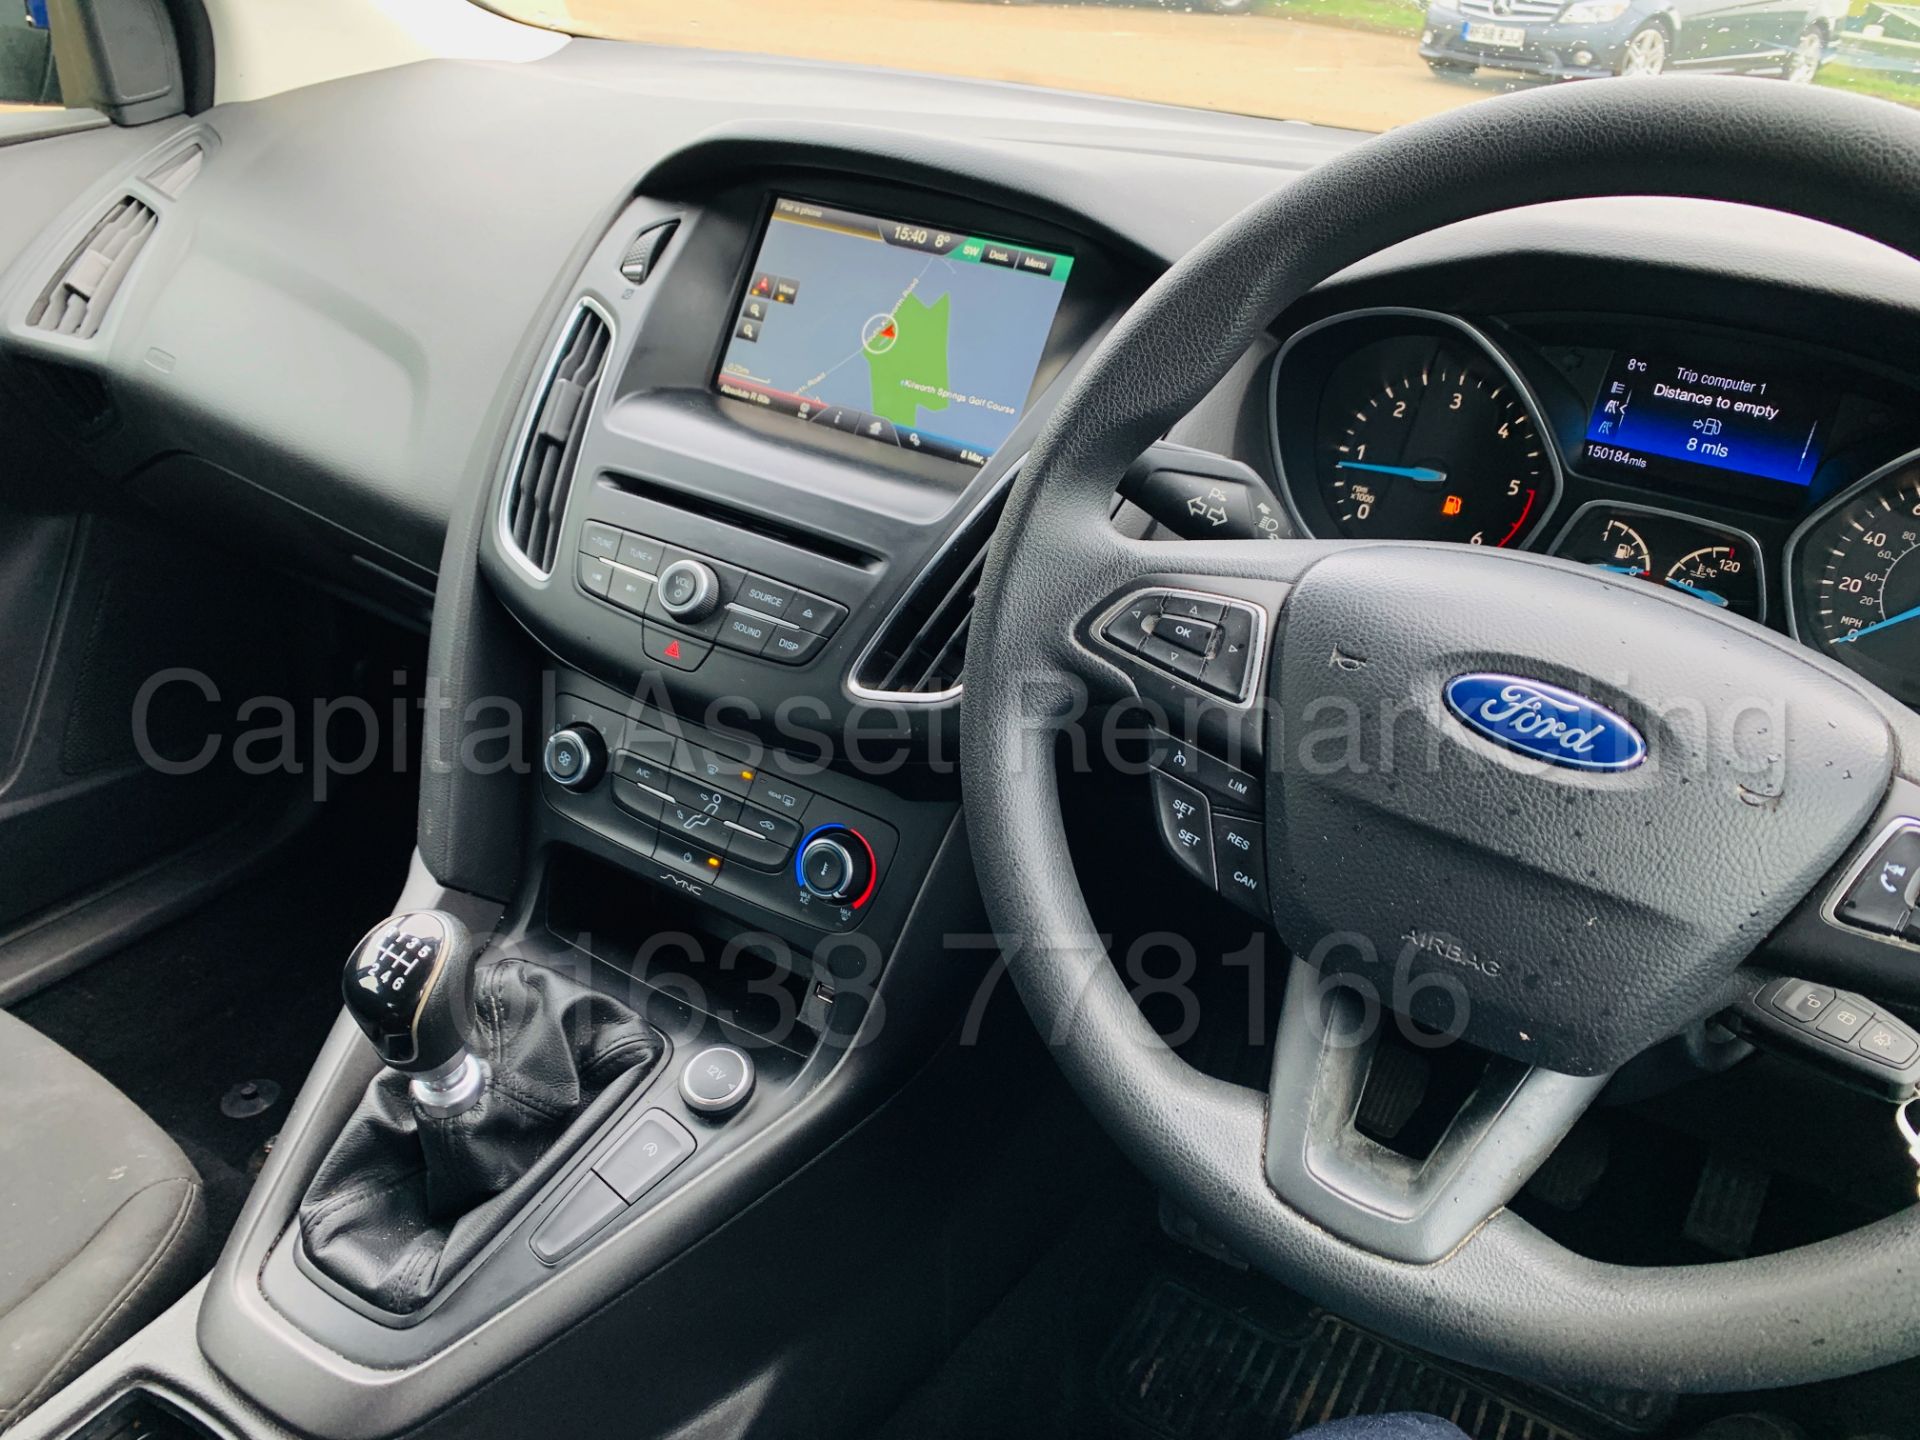 FORD FOCUS *STYLE* 5 DOOR HATCHBACK (2015-NEW MODEL) '1.5 TDCI-6 SPEED' (1 OWNER FROM NEW) *SAT NAV* - Image 27 of 39